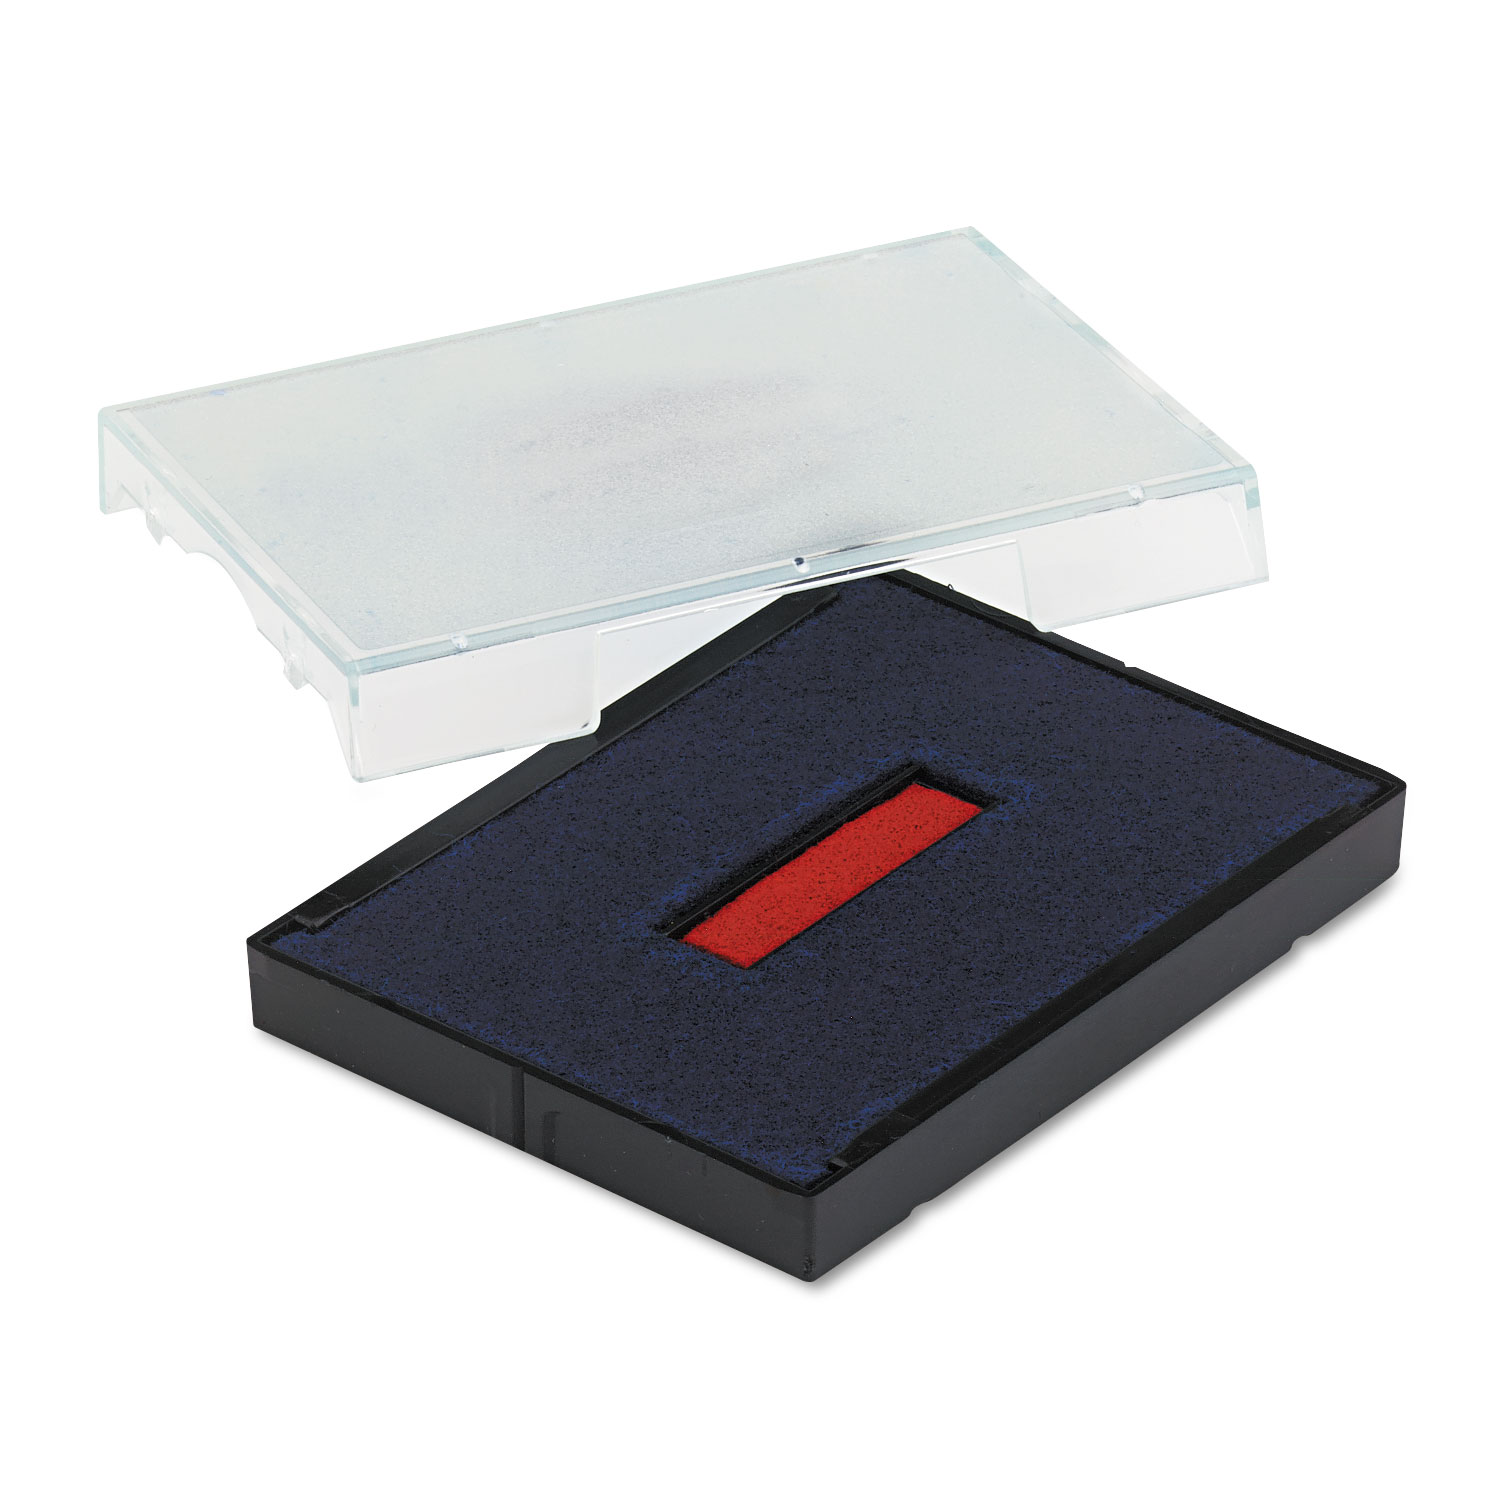  Identity Group P4727BR Trodat T4727 Dater Replacement Pad, 1 5/8 x 2 1/2, Blue/Red (USSP4727BR) 